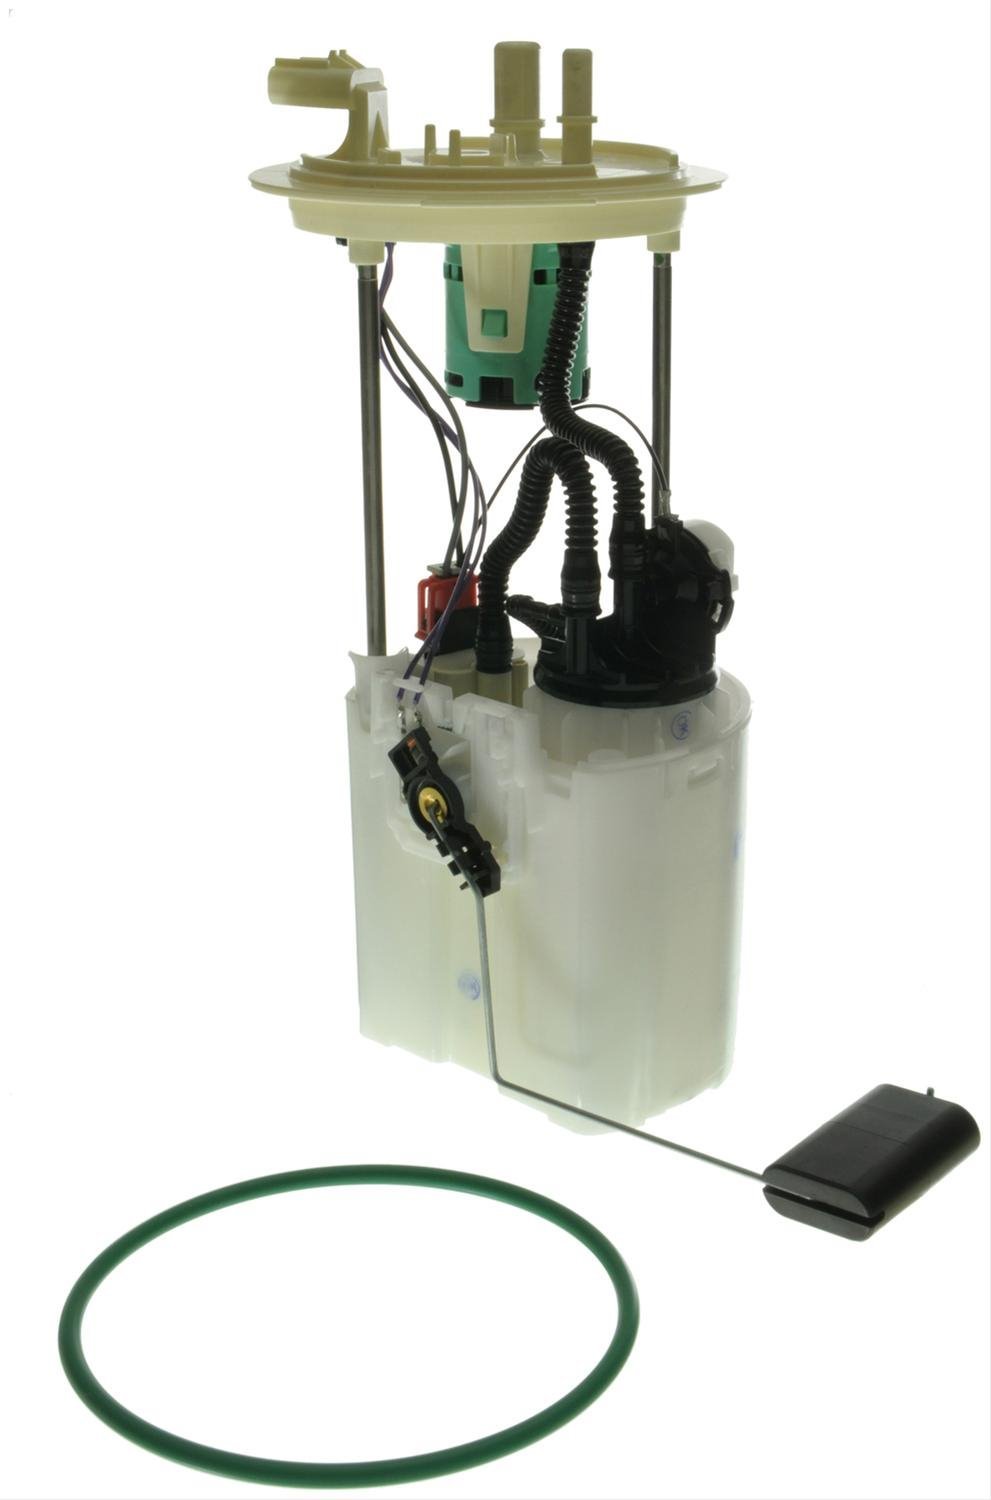 OE Ford Replacement Fuel Pump Module Assembly for 2009-2014 Ford Expedition/2010-2011,2013-2014 Lincoln Navigator